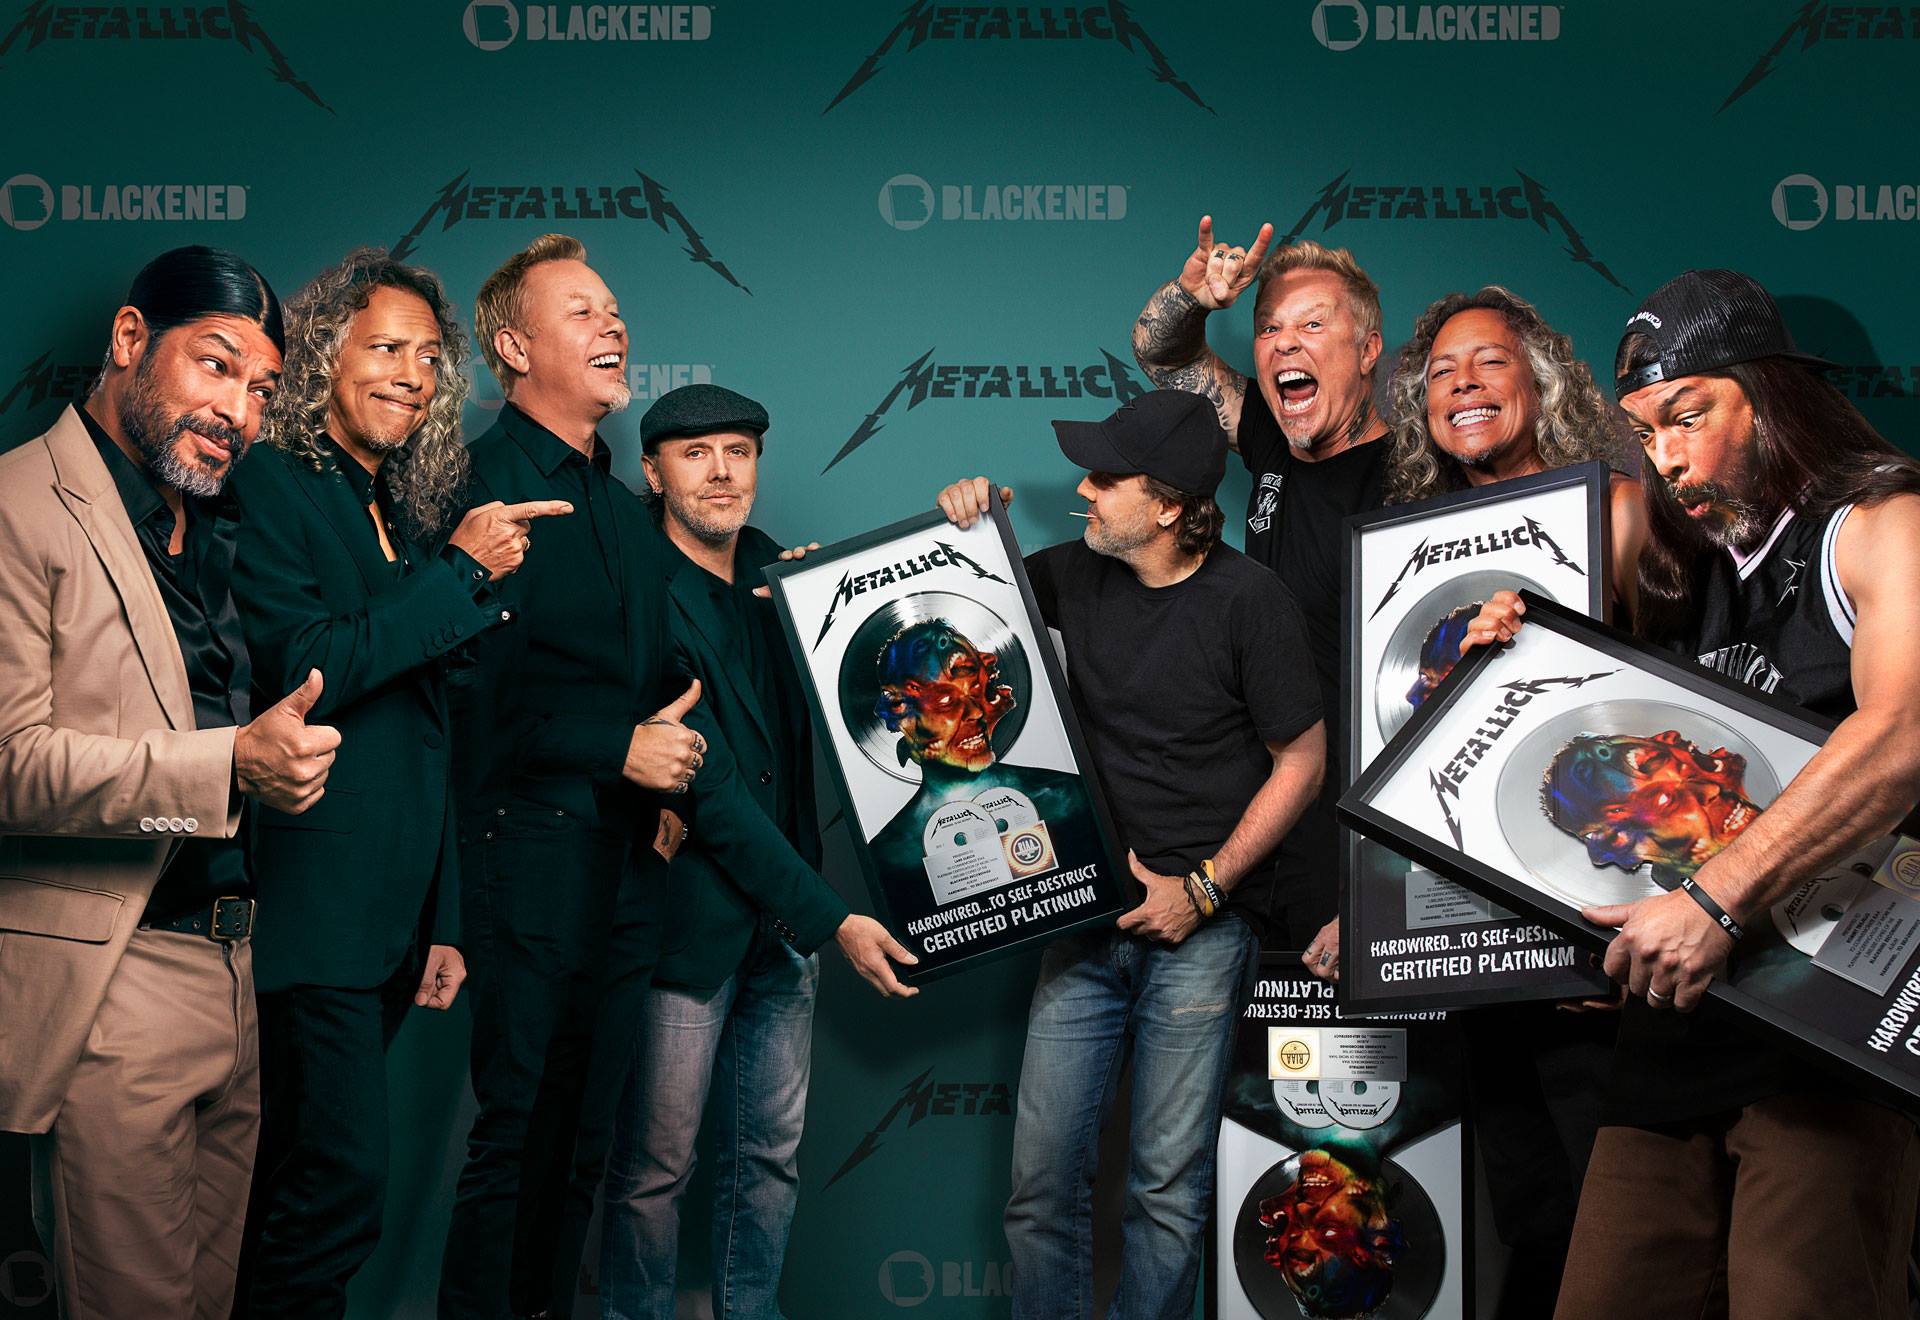 Metallica's 'Hardwired…To Self-Destruct' officially Certified Platinum